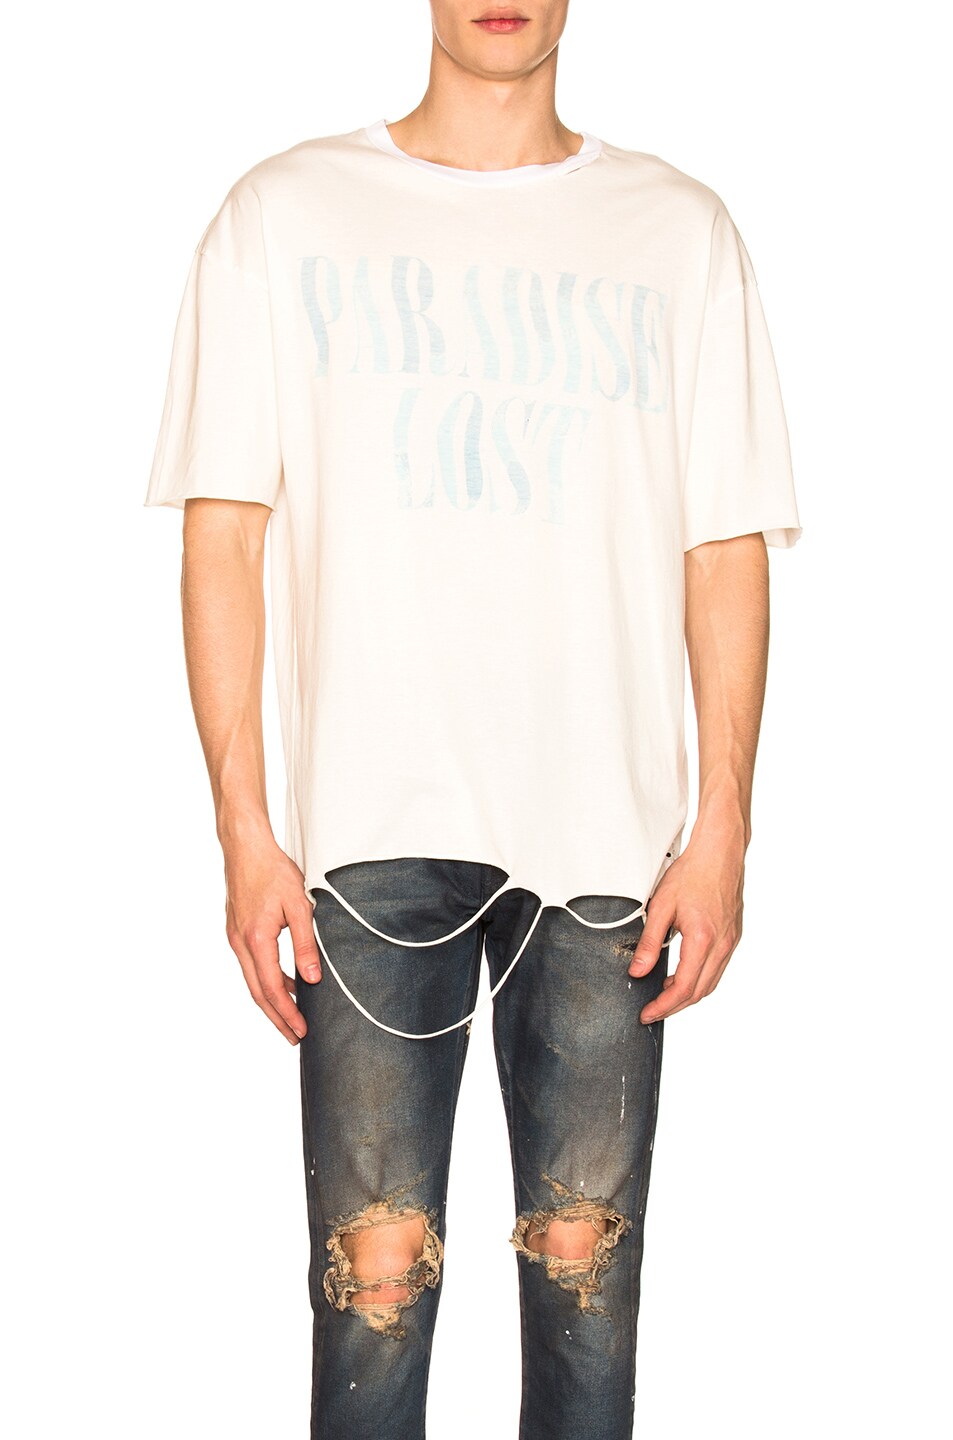 Image 1 of Alchemist Paradise Lost Distressed Short Sleeve Tee in White